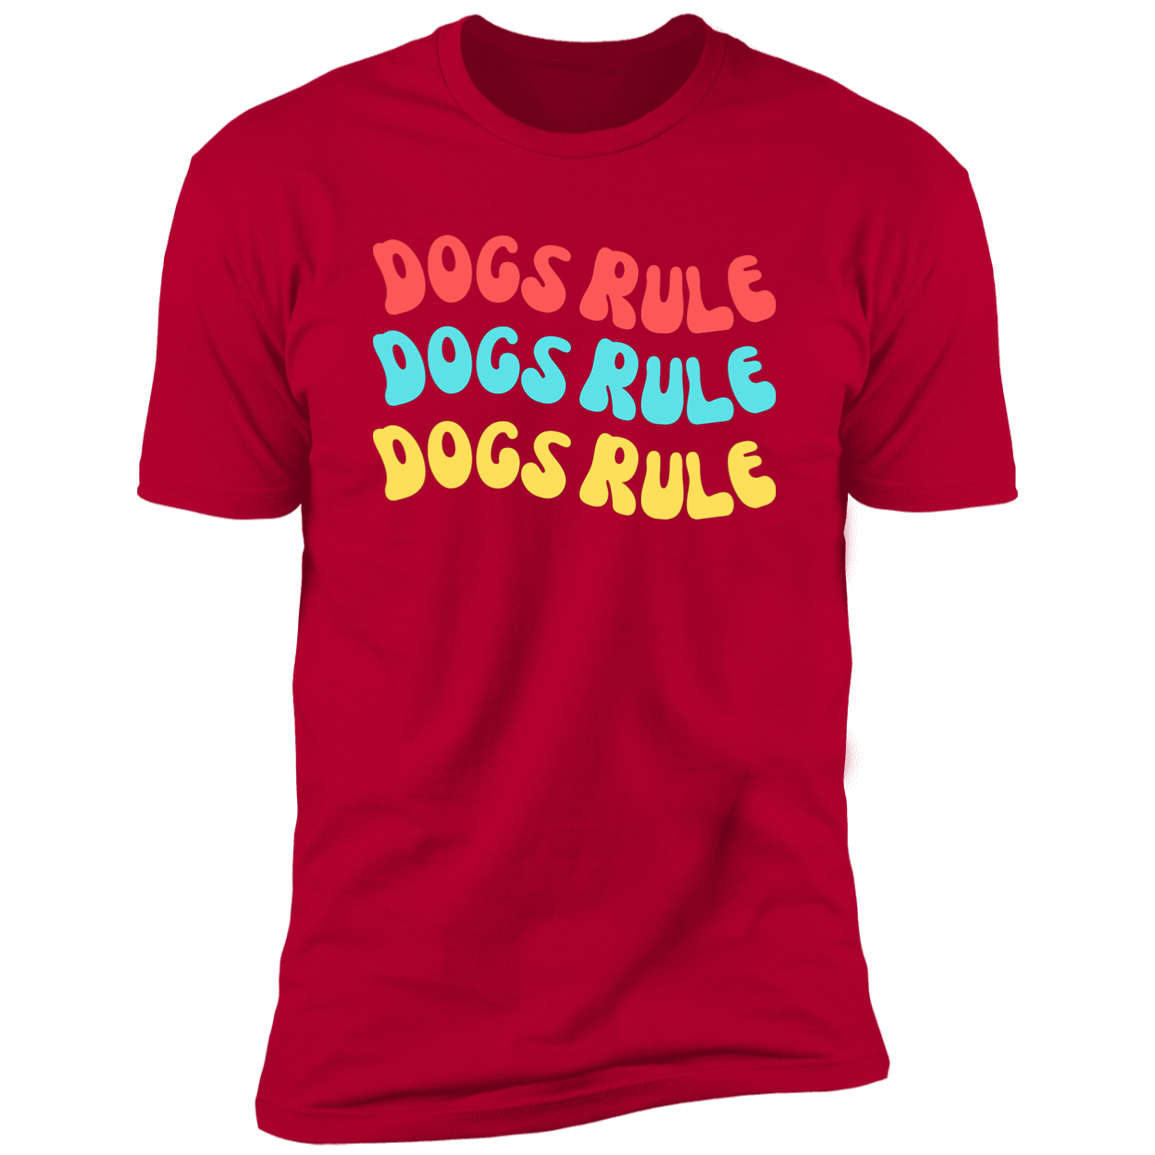 Dogs Rule Dog Shirt, dog shirt for humans, dog mom and dog dad shirt, in red